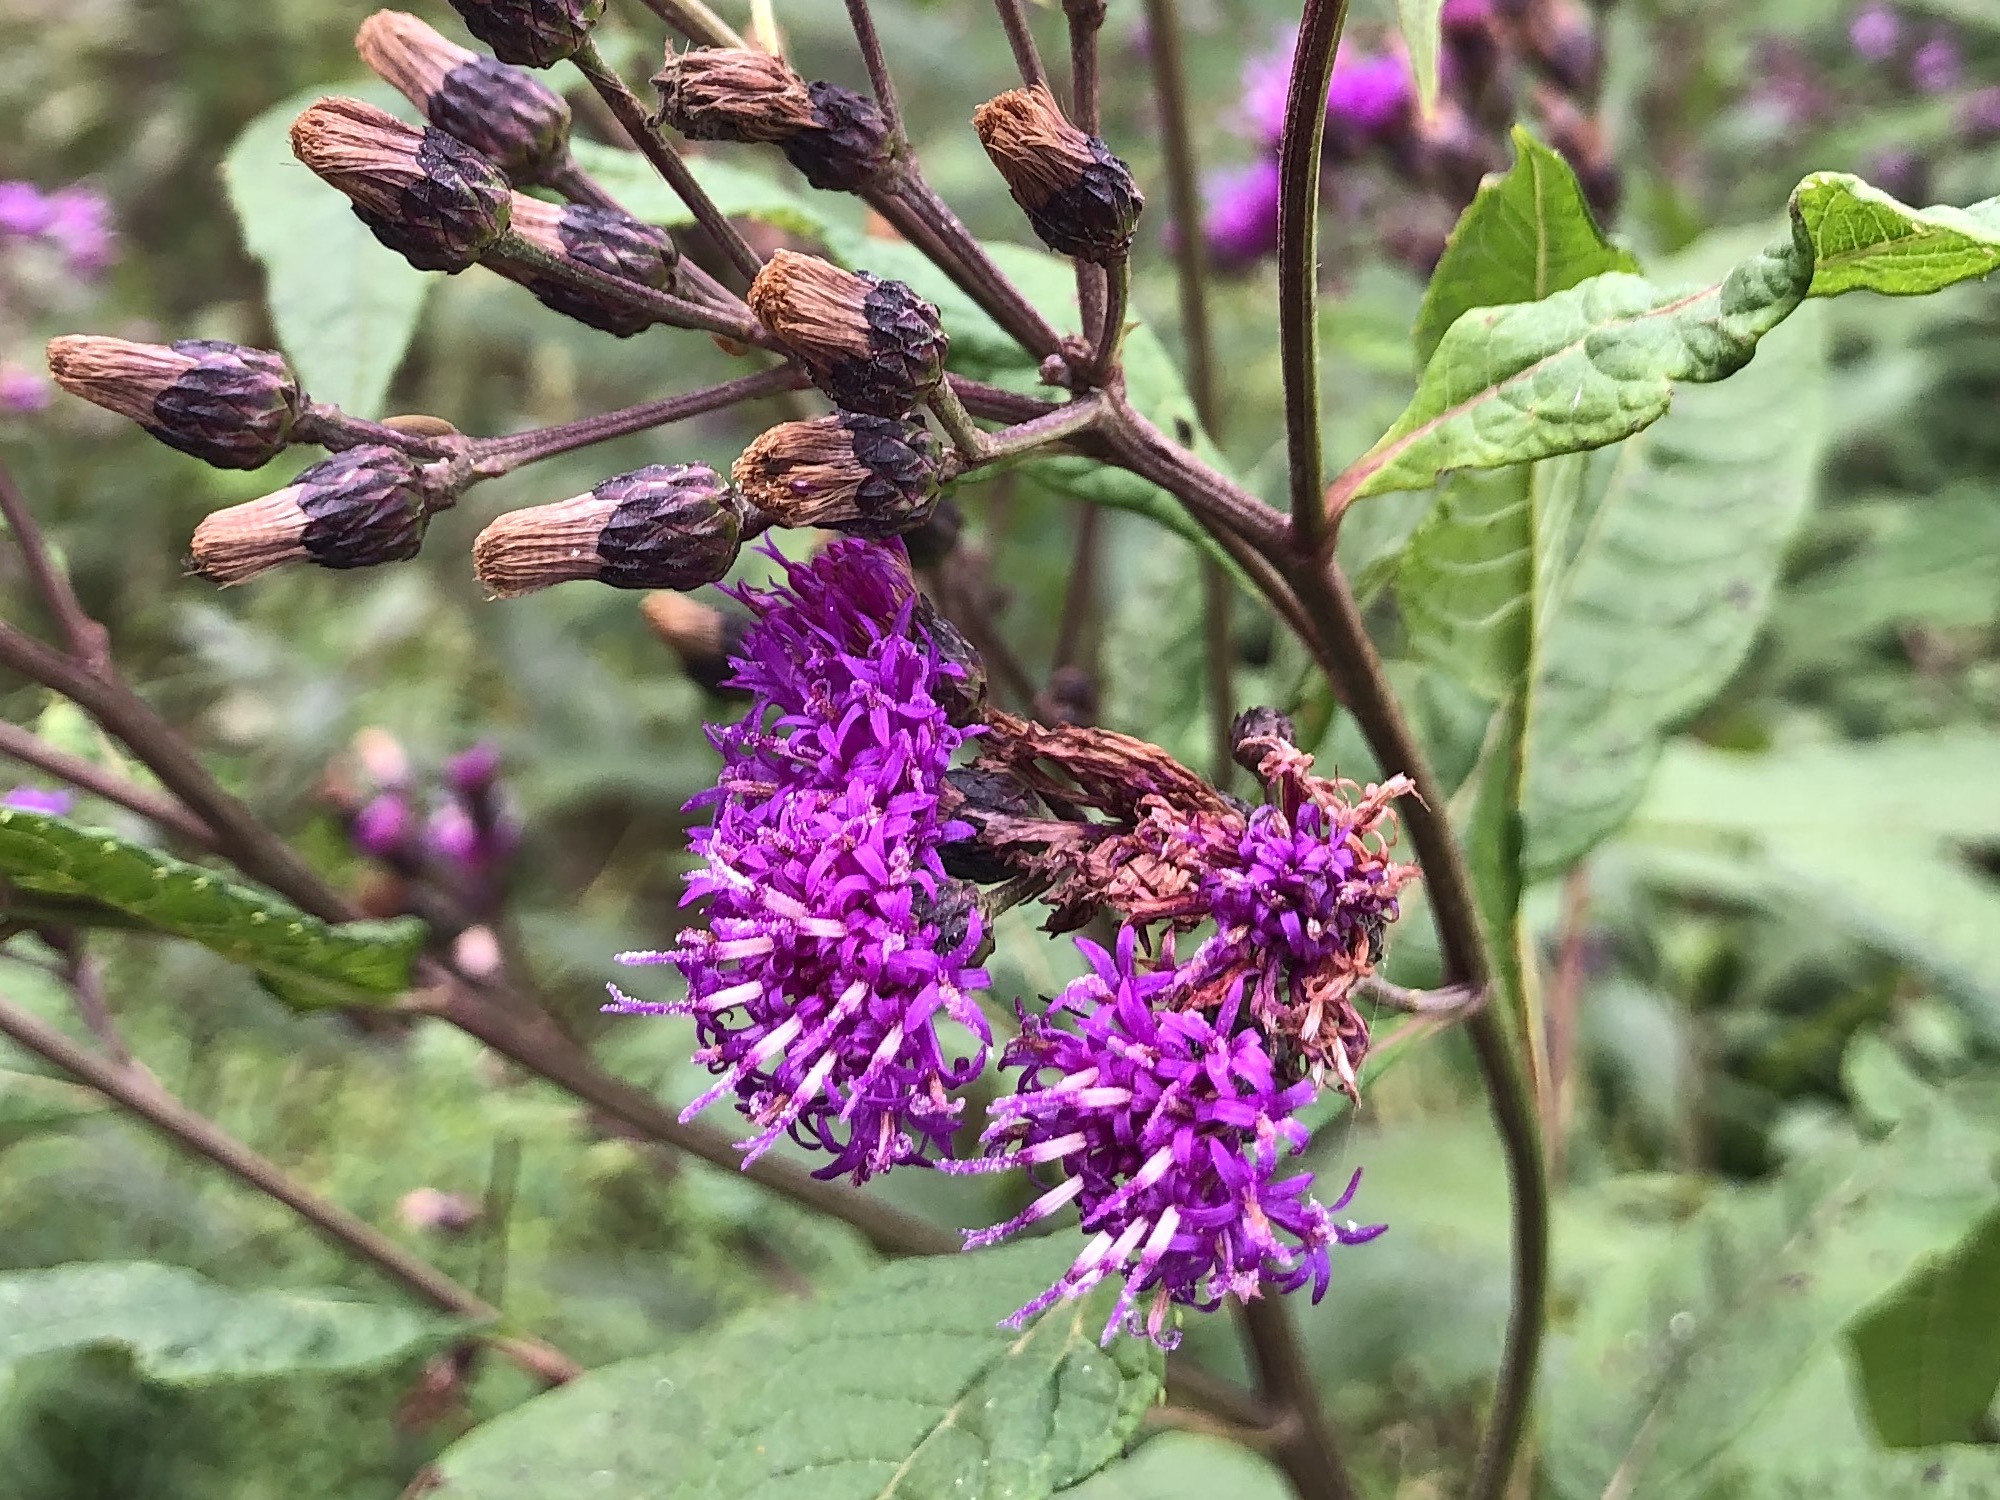 Tall Ironweed in drainage ditch along bikepath between Midvale Blvd. and the Beltline on September 14, 2020.